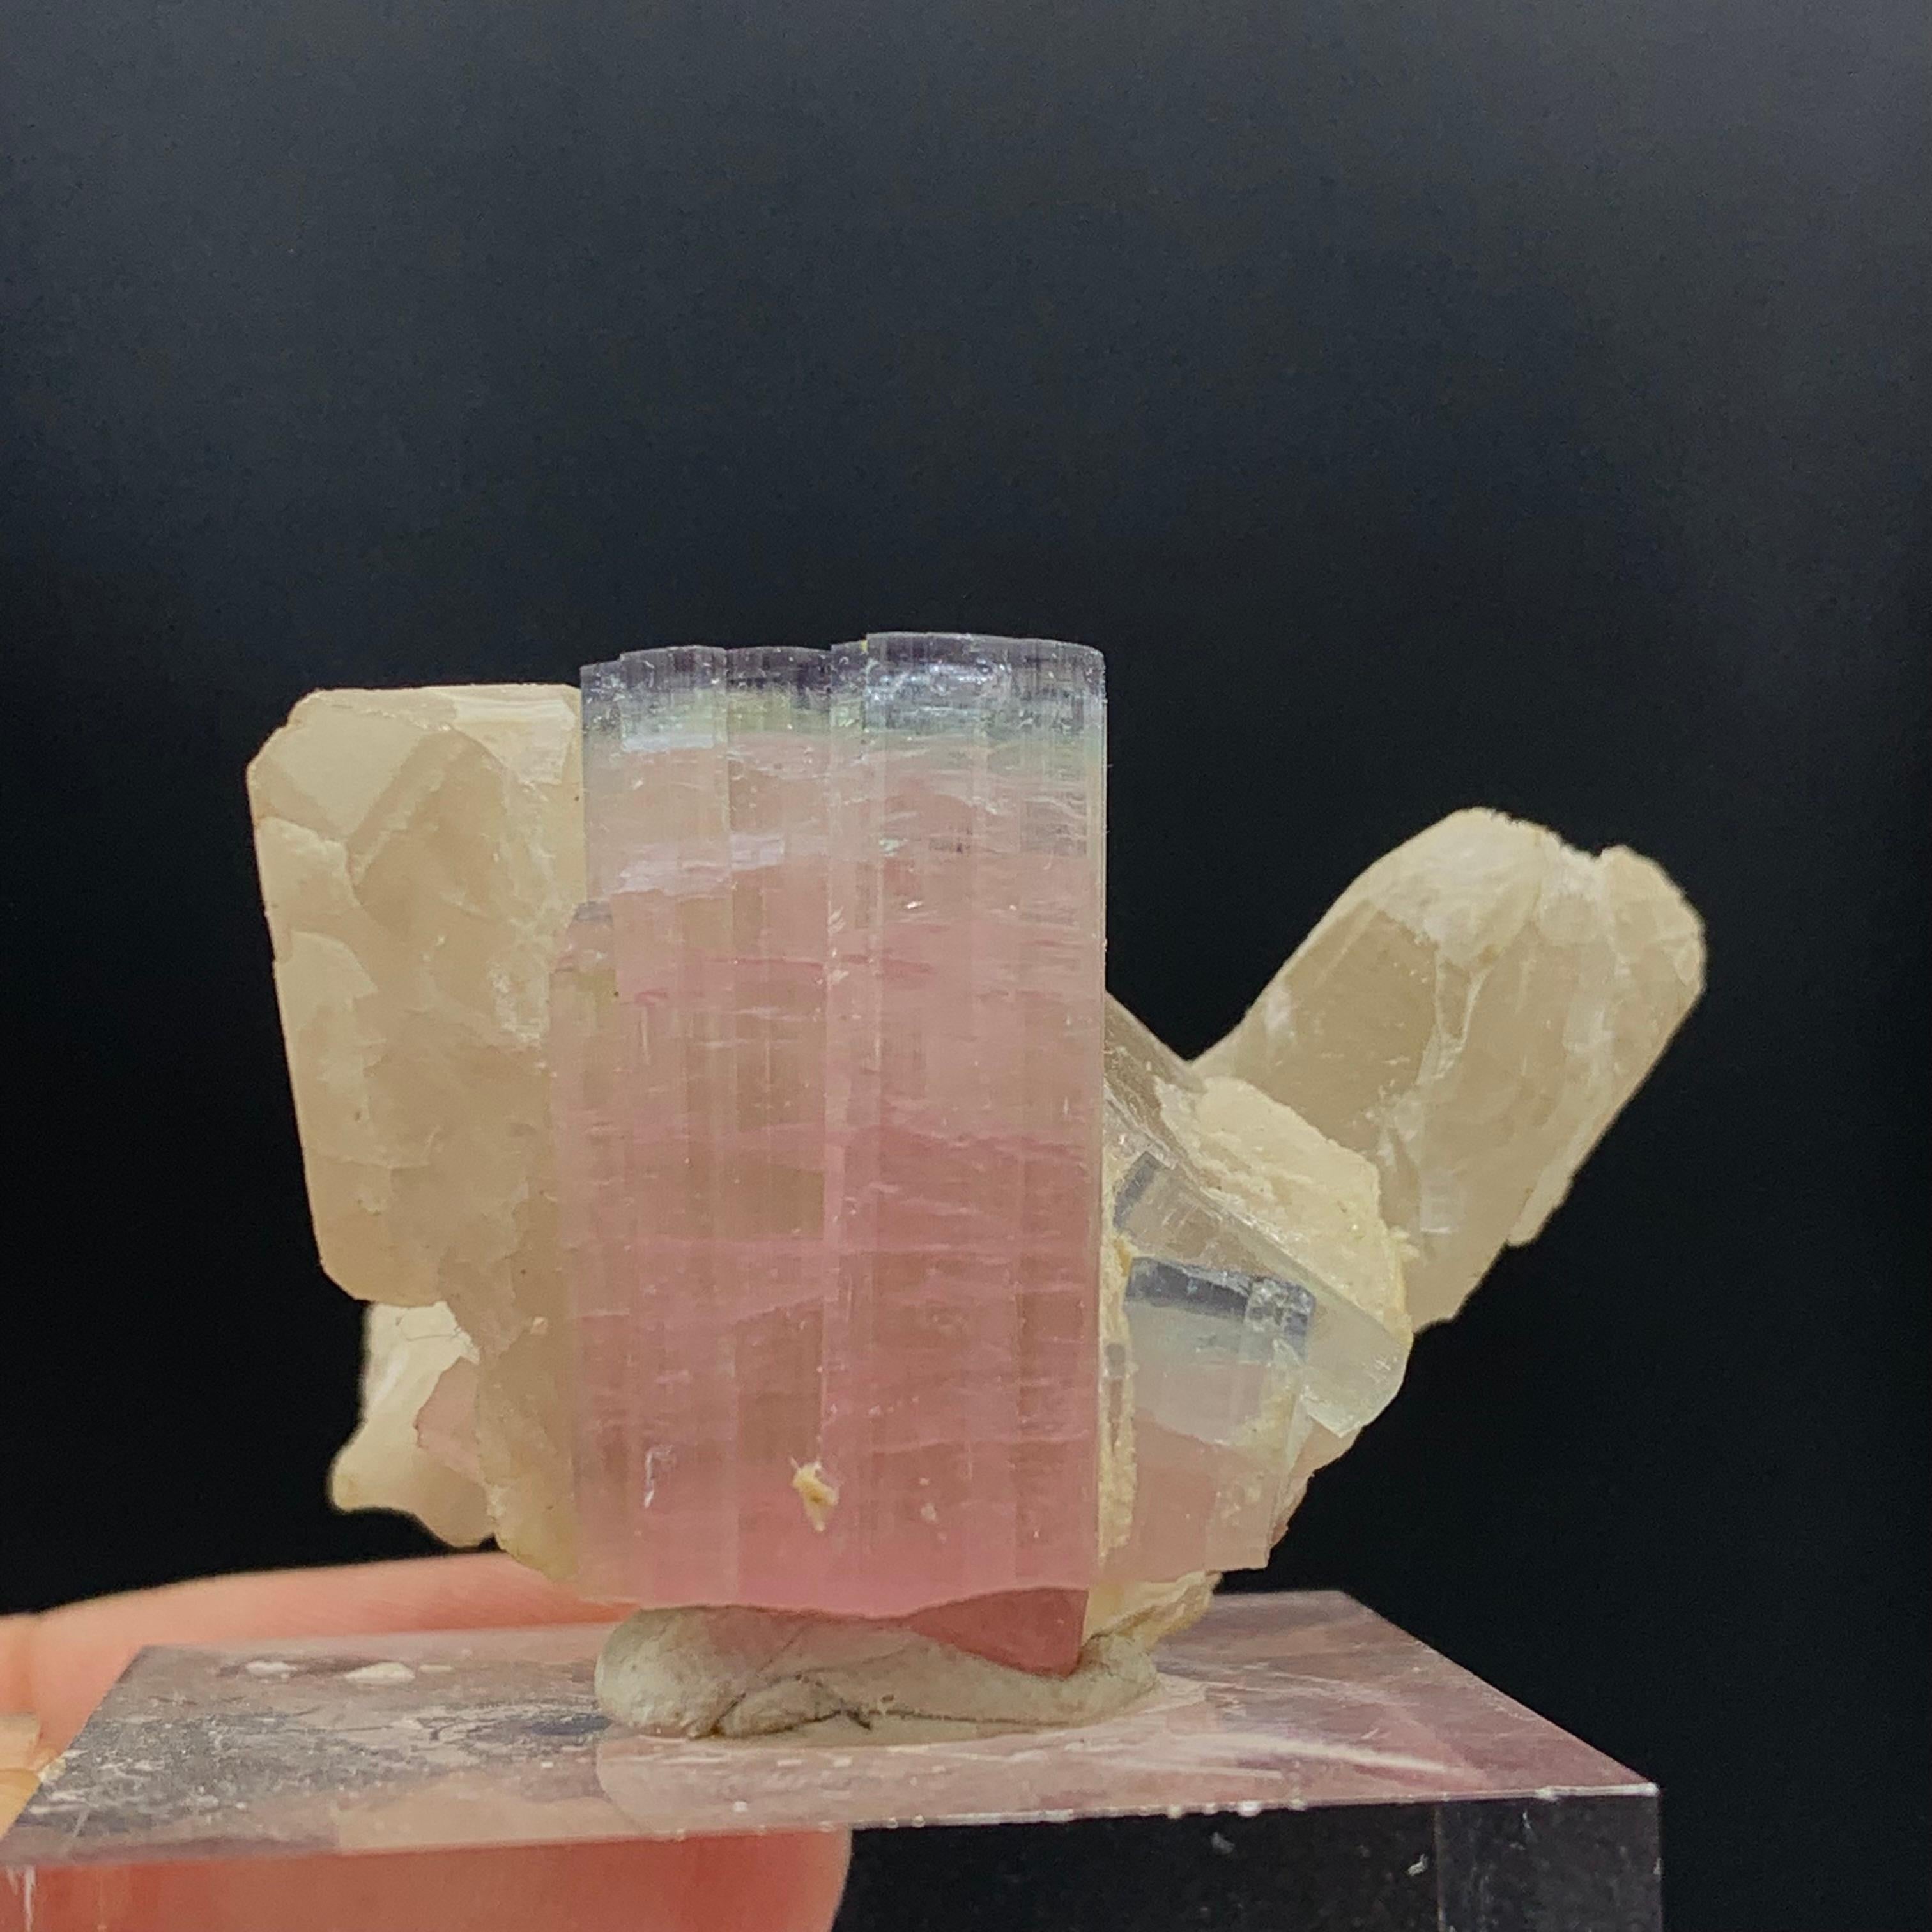 Light Pink Tourmaline specimen Elongated on Quartz with Mica
WEIGHT: 187.25 Carat
DIMENSIONS : 2.7 x 4.5 x 3.4 cm
ORIGIN: Kunar, Afghanistan
TREATMENT None
Tourmaline is an extremely popular gemstone; the name Tourmaline is derived from